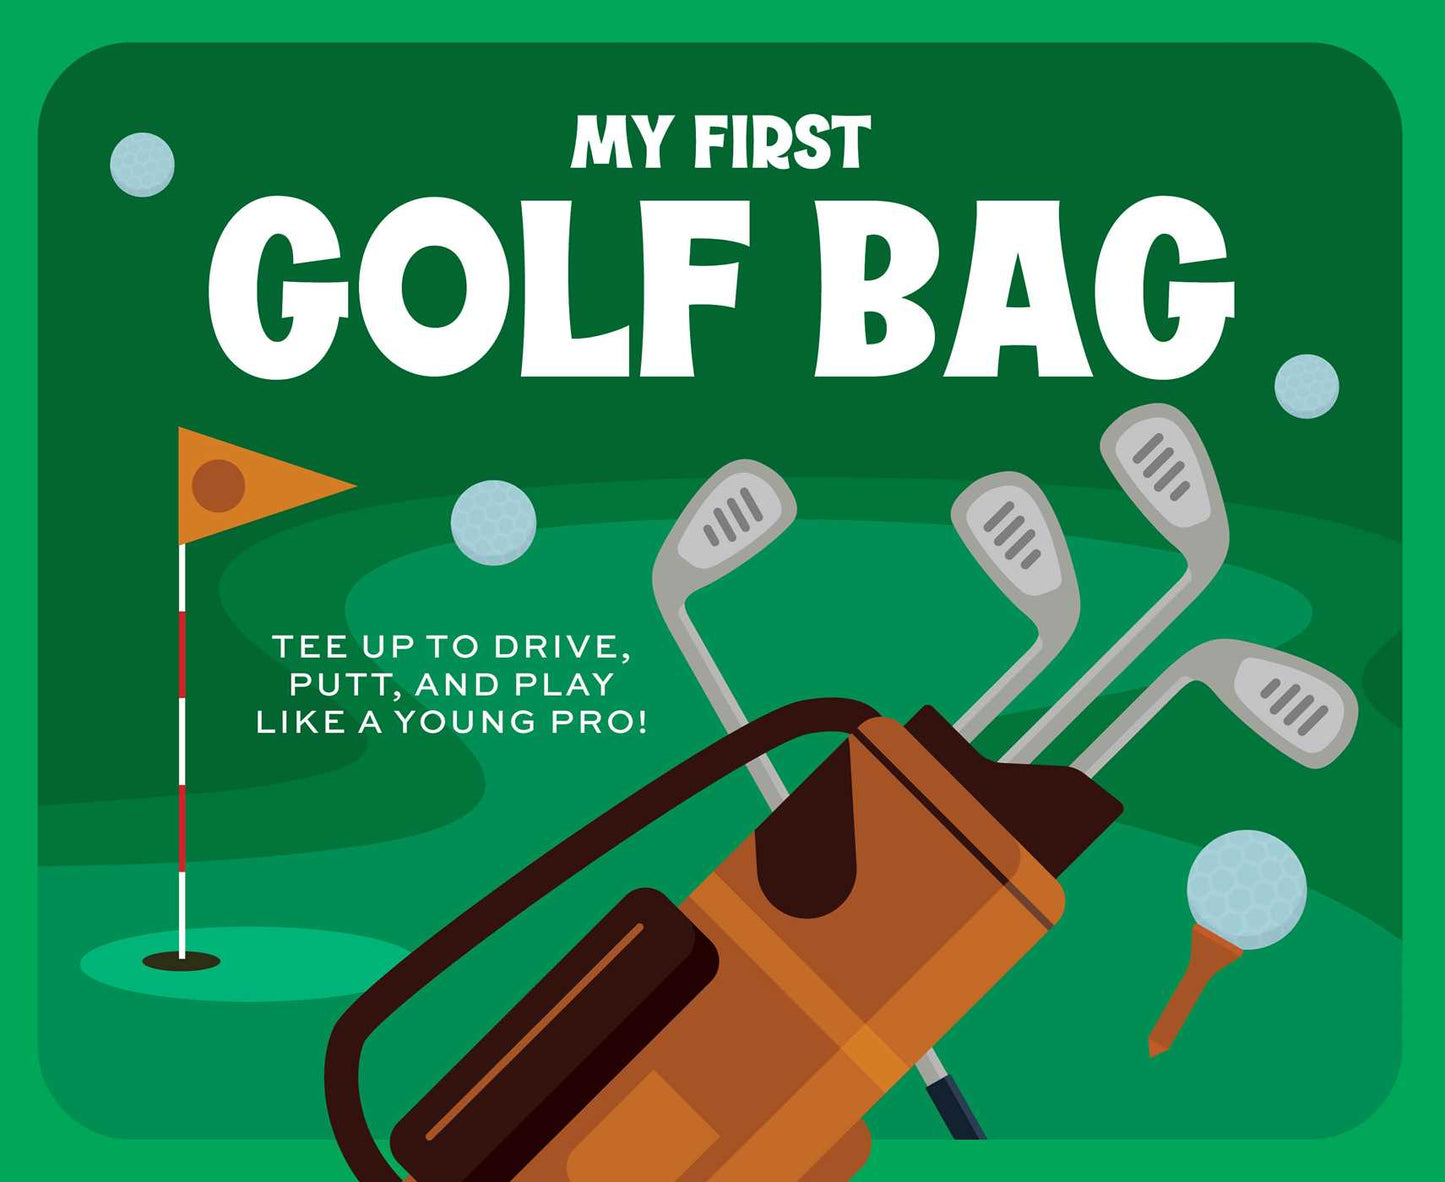 My First Golf Bag: Tee Up to Drive, Putt, and Play like a Young Pro!